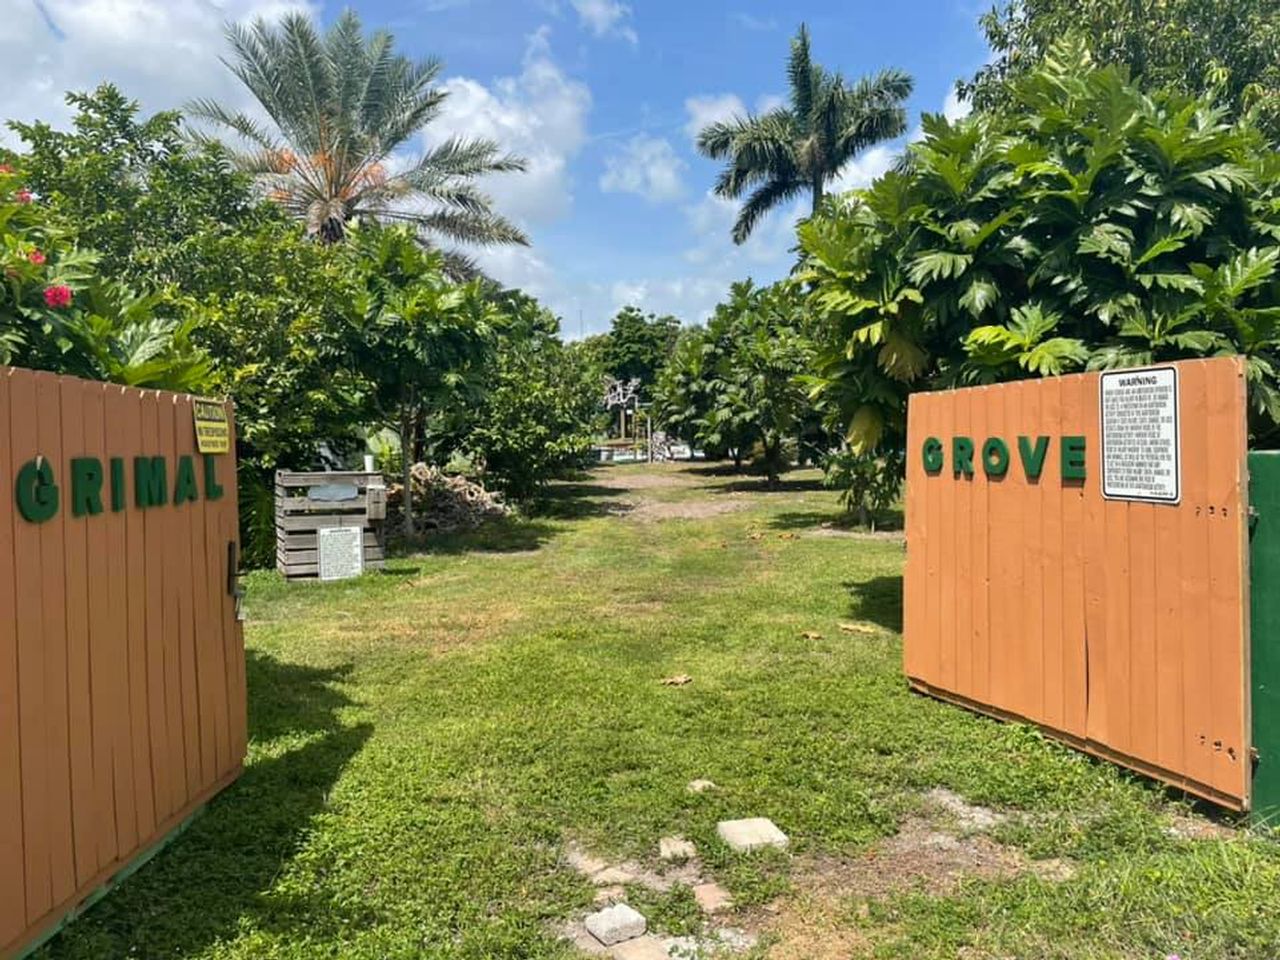 Visitors can explore the 2-acre fruit farm Grimal Grove and sample exotic fruits.